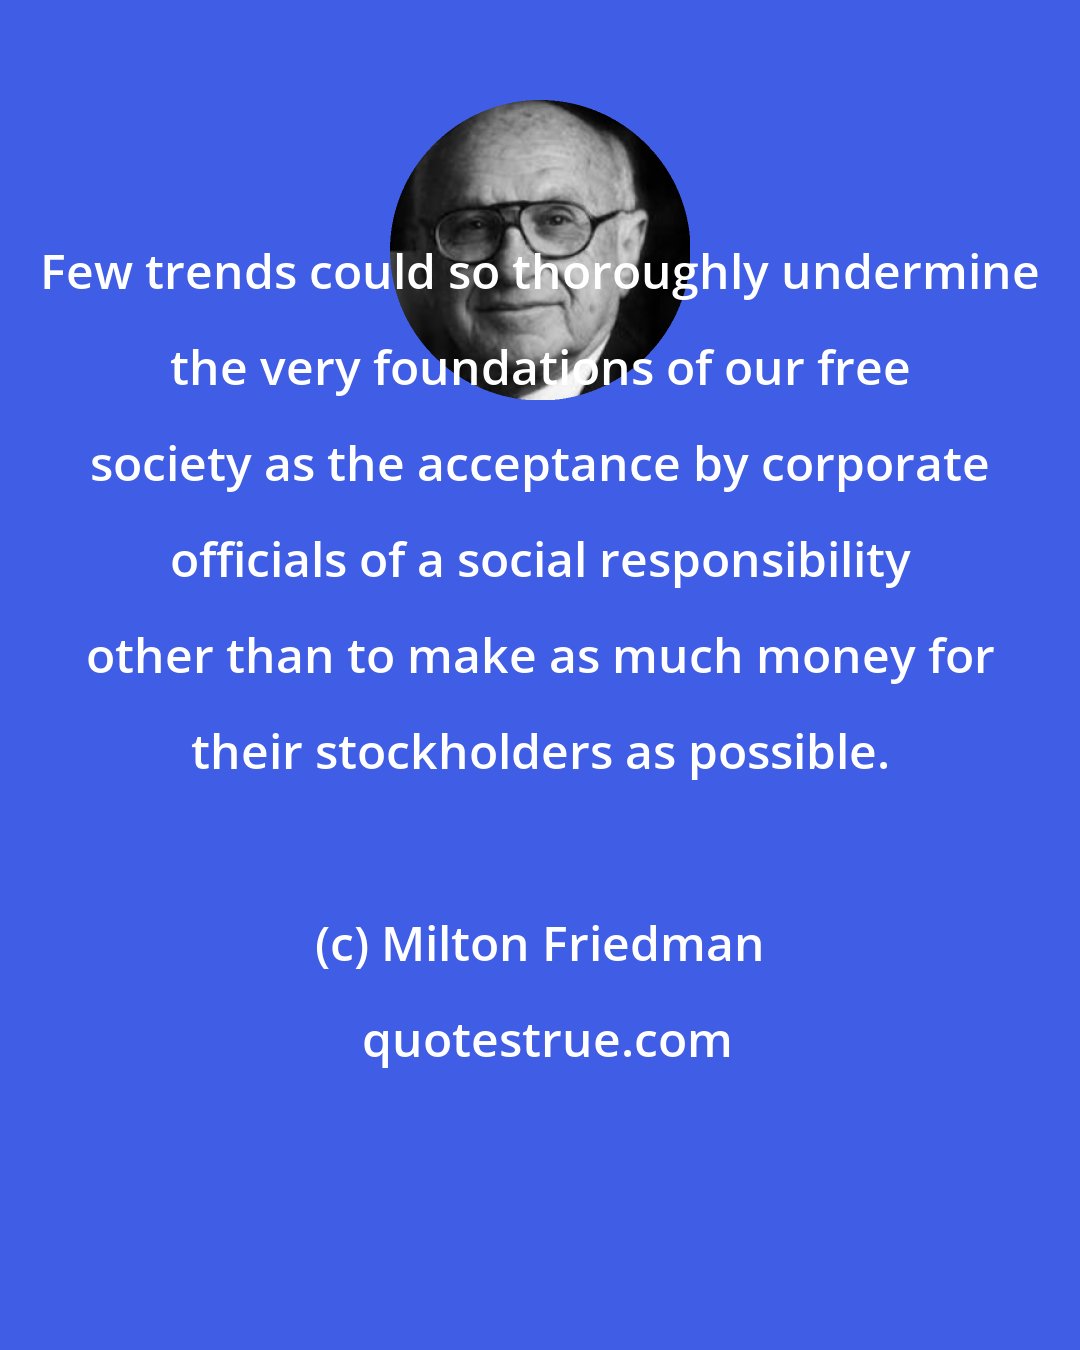 Milton Friedman: Few trends could so thoroughly undermine the very foundations of our free society as the acceptance by corporate officials of a social responsibility other than to make as much money for their stockholders as possible.